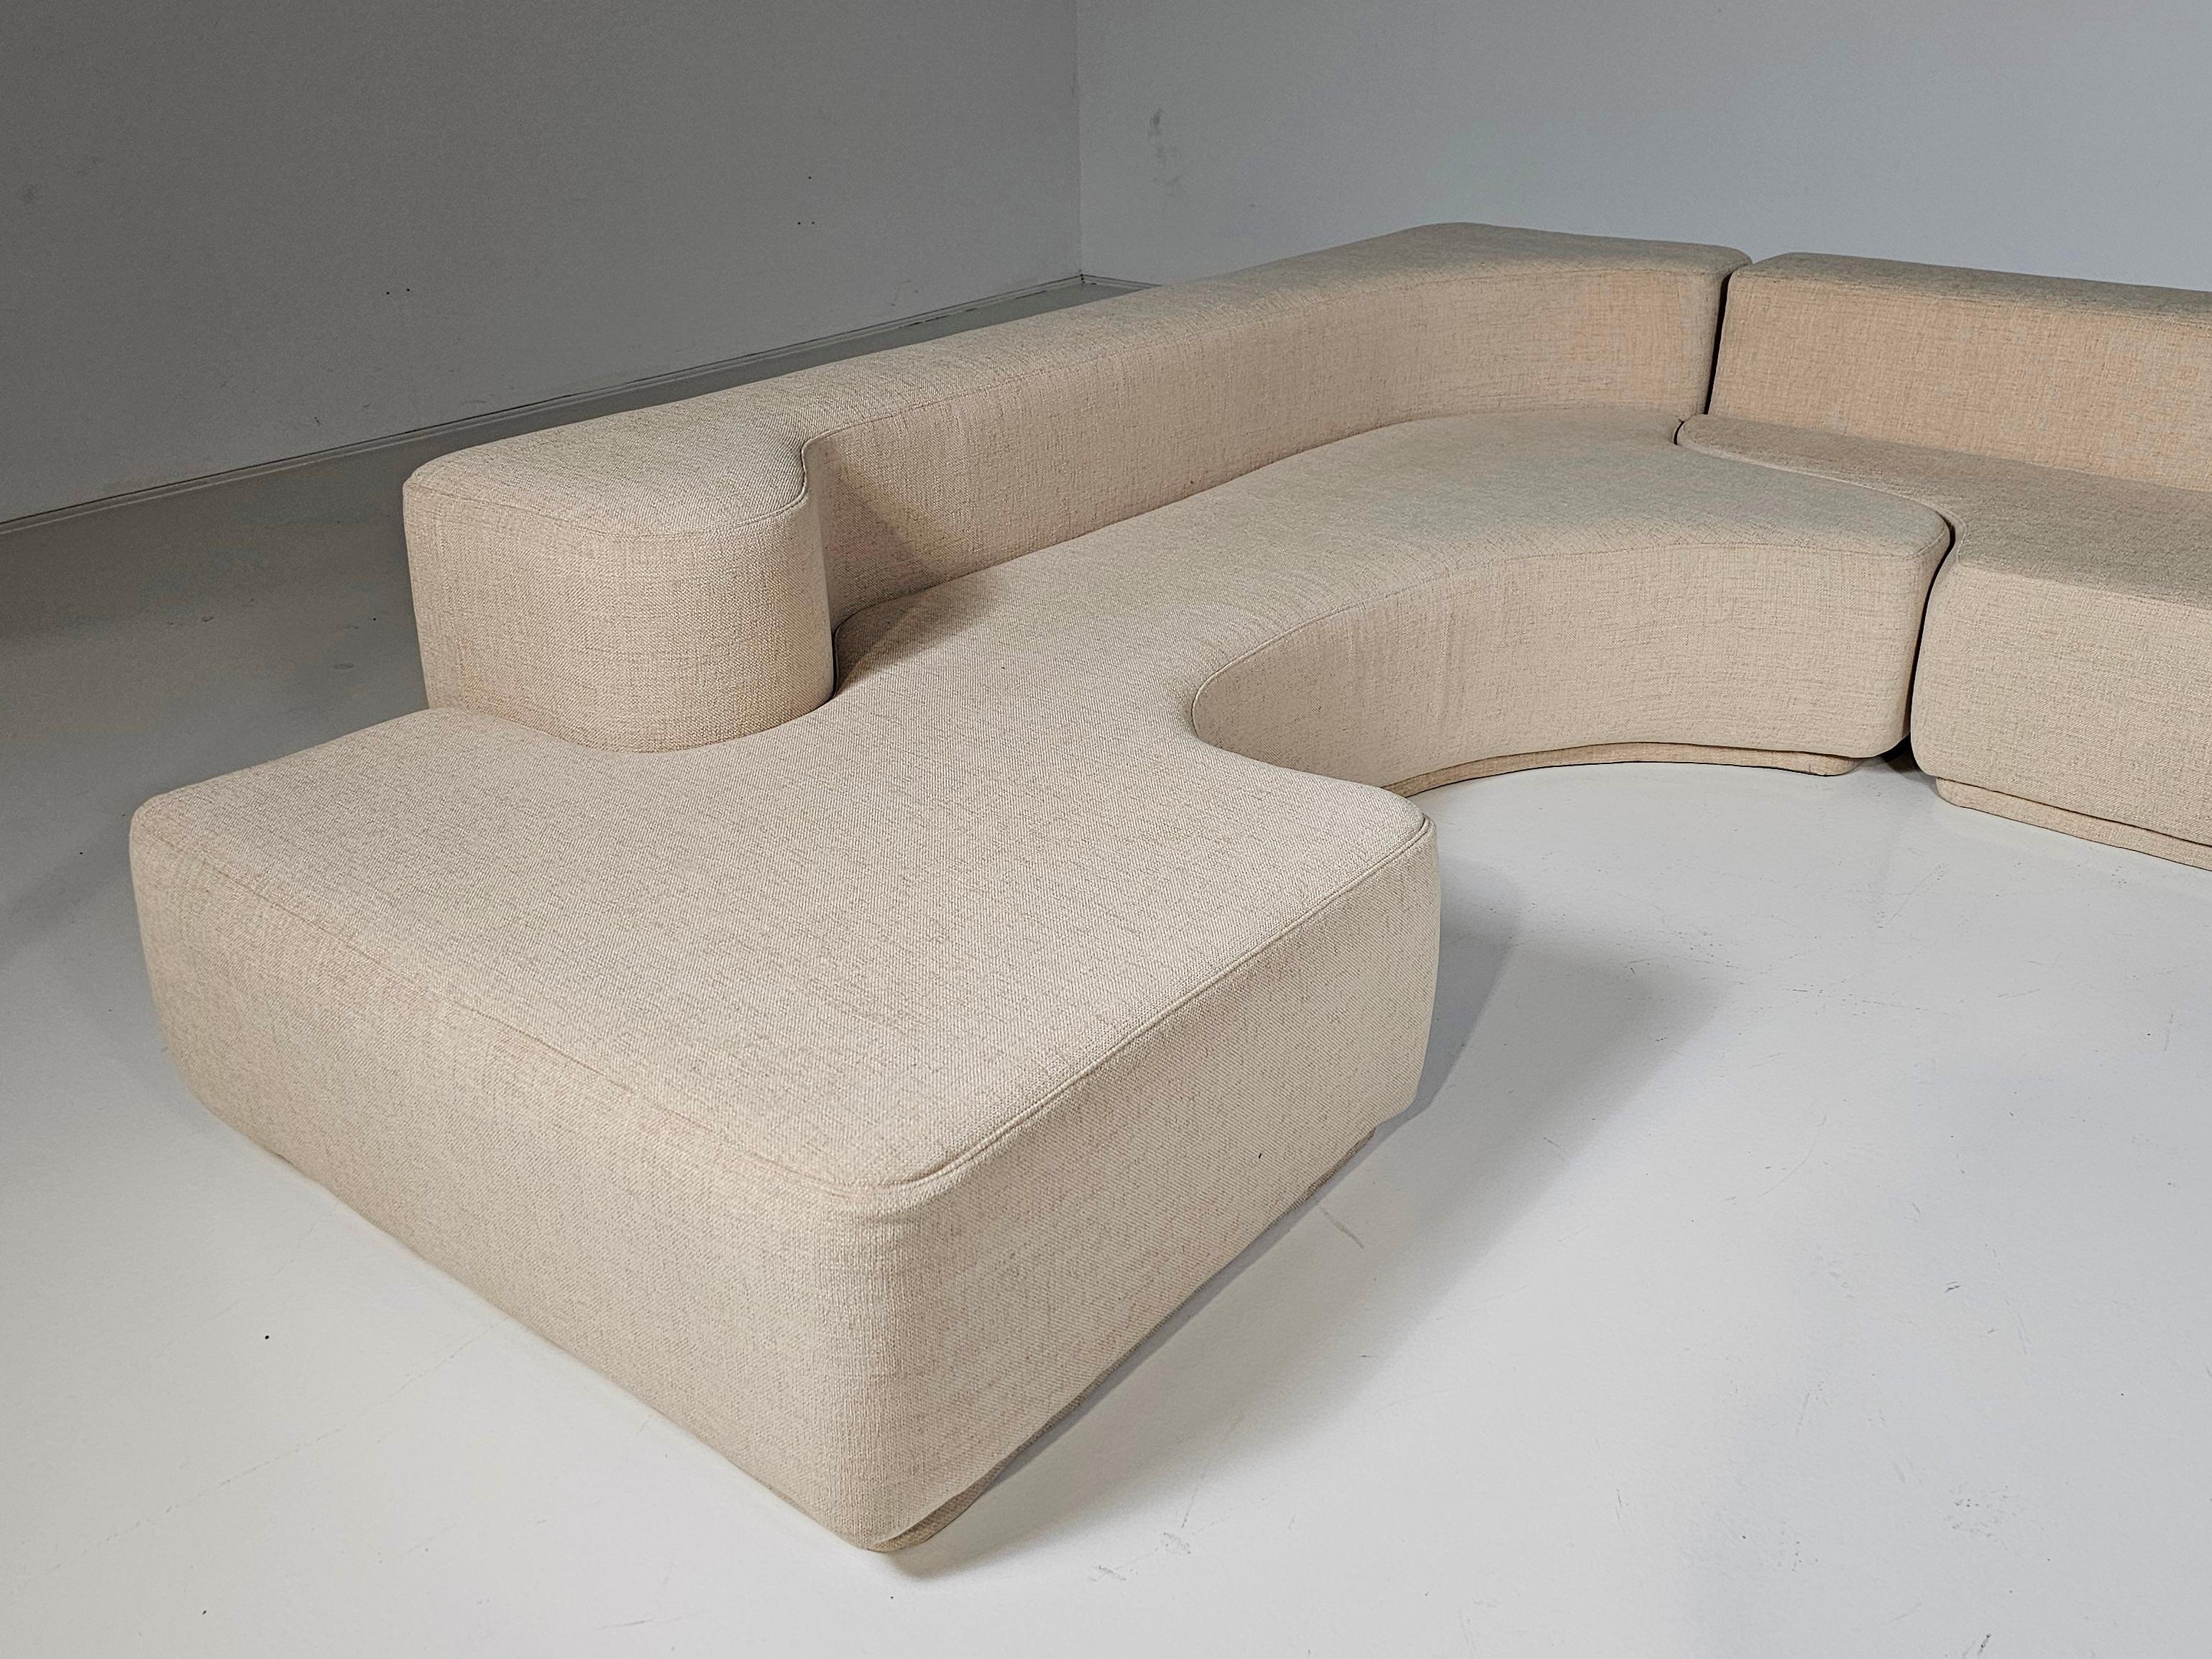 Chenille Lara Sofa in beige chenille by Pamio, Toso and Massari for Stilwood, Italy, 1960